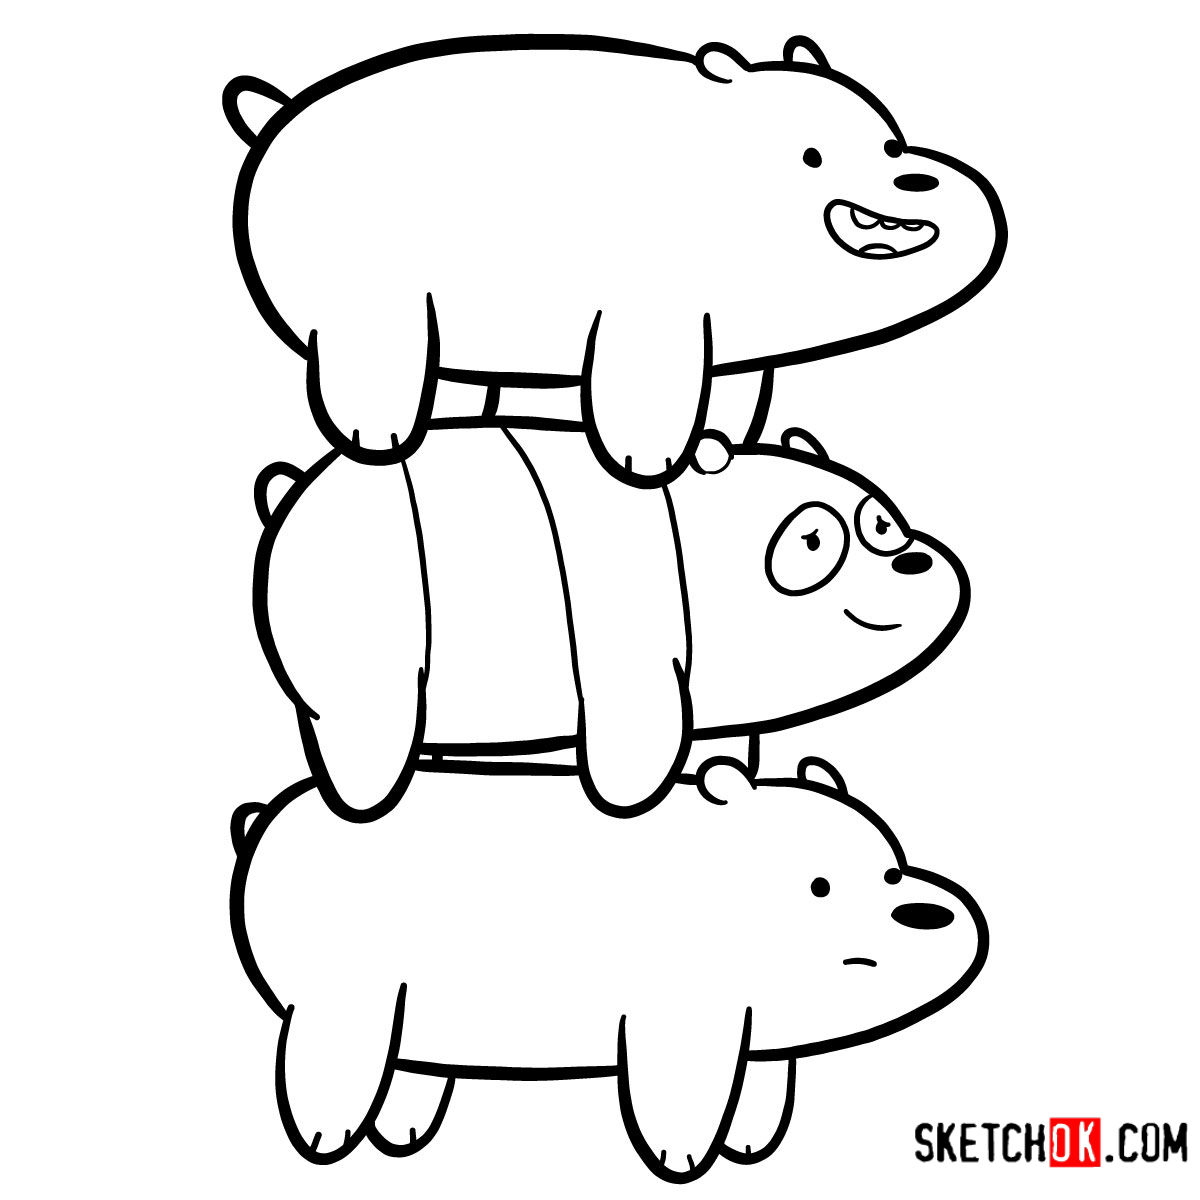 How to draw the bears standing on each others back | We Bare Bears - step 16